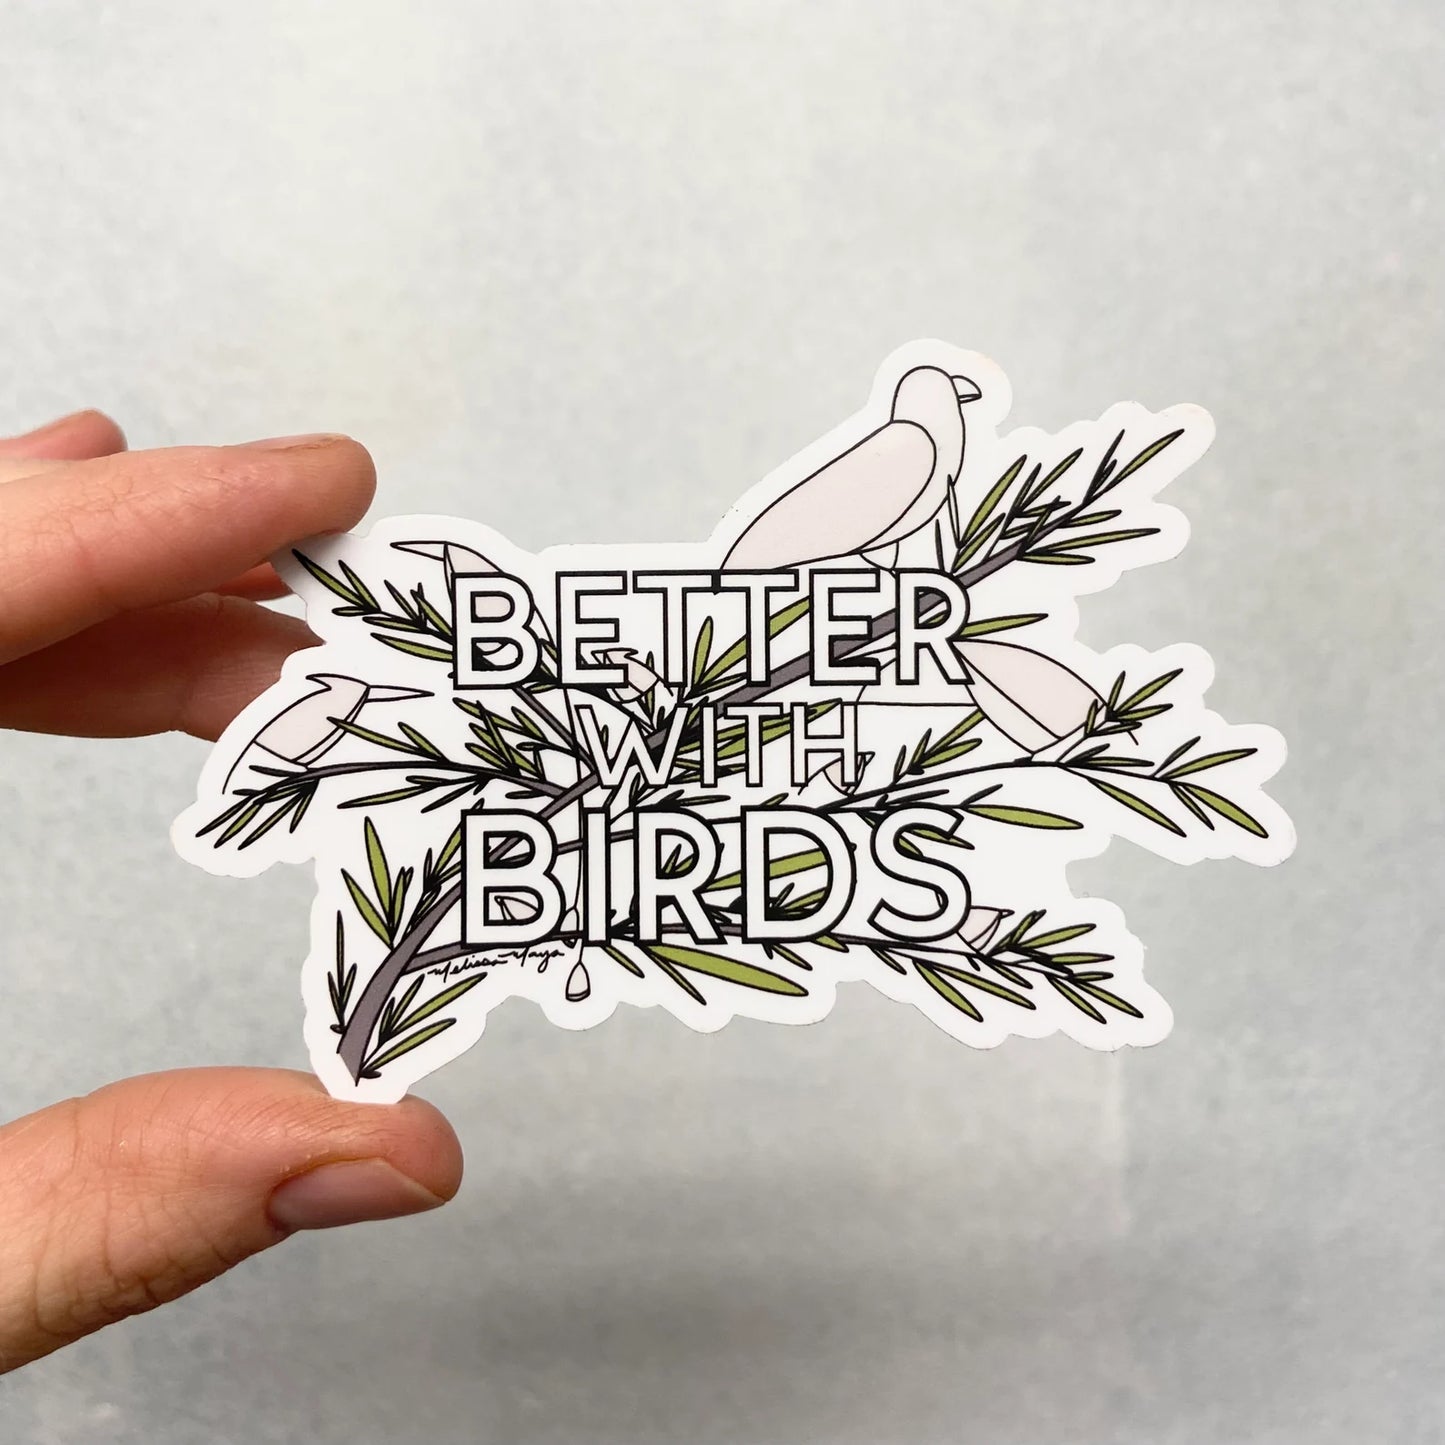 Better with Birds STICKER. 4 inches. SCROLL DOWN to build you sticker pack - 20% off two or more